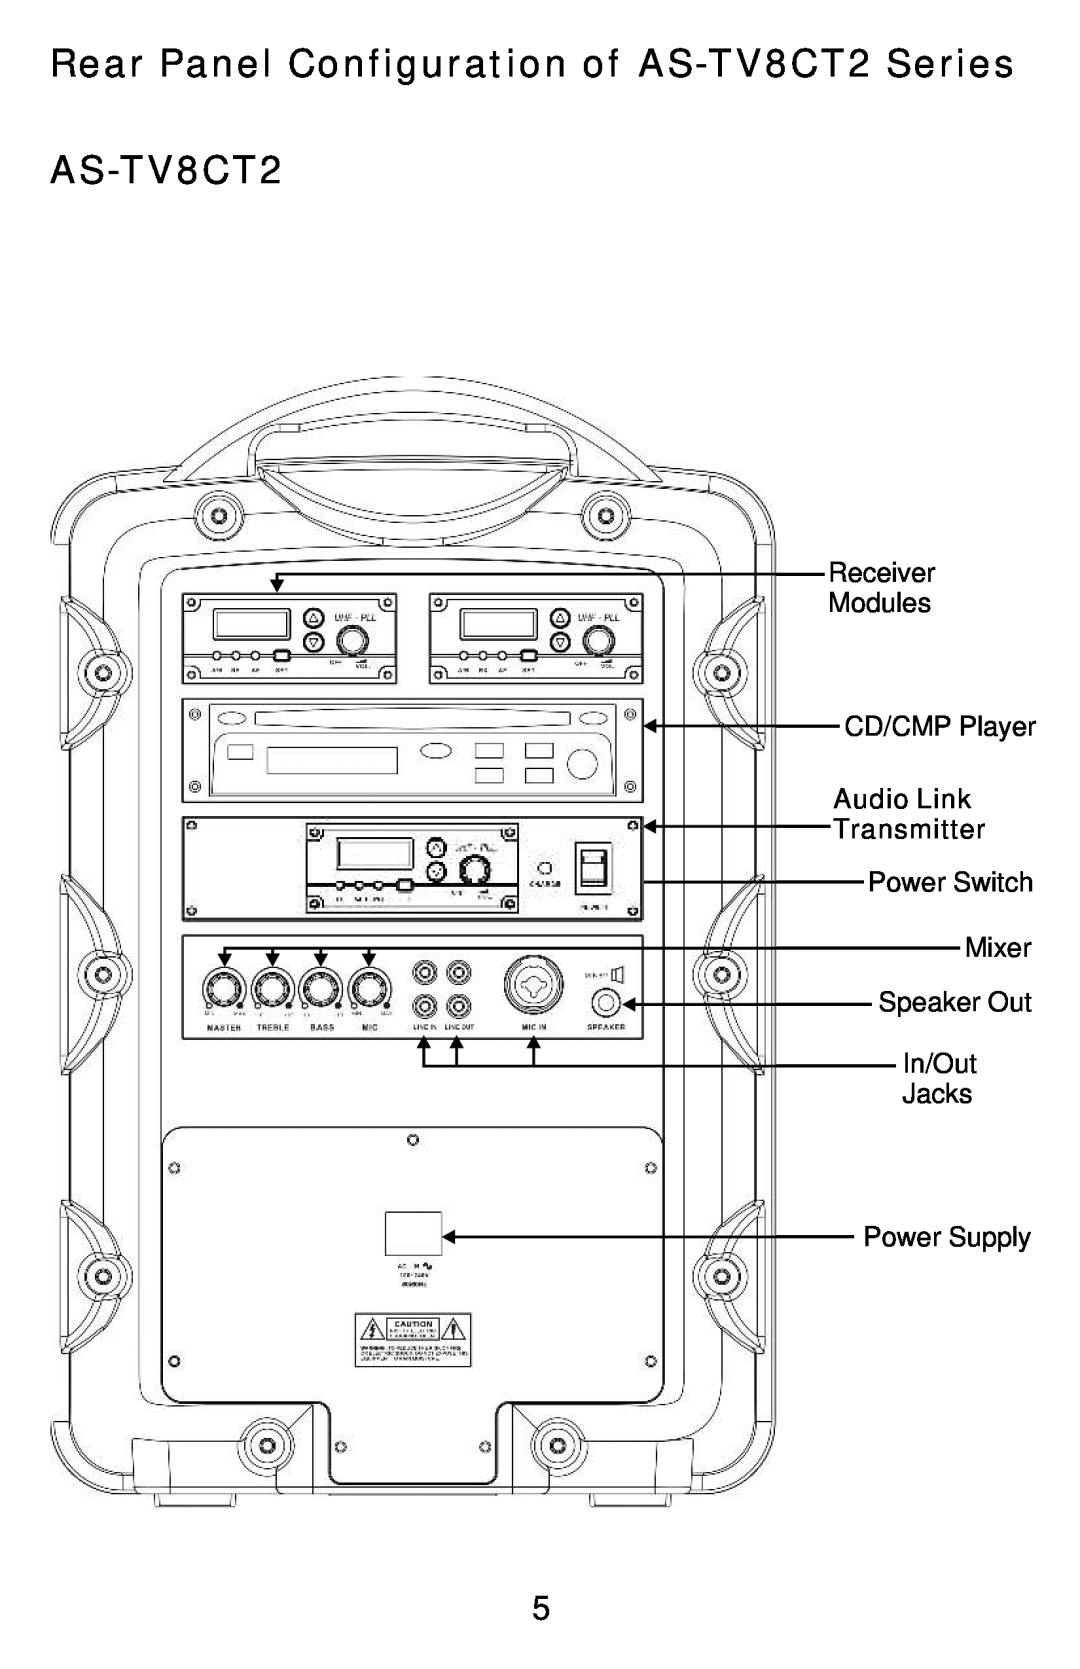 Traveler Rear Panel Configuration of AS-TV8CT2Series, Receiver Modules CD/CMP Player Audio Link, Jacks Power Supply 